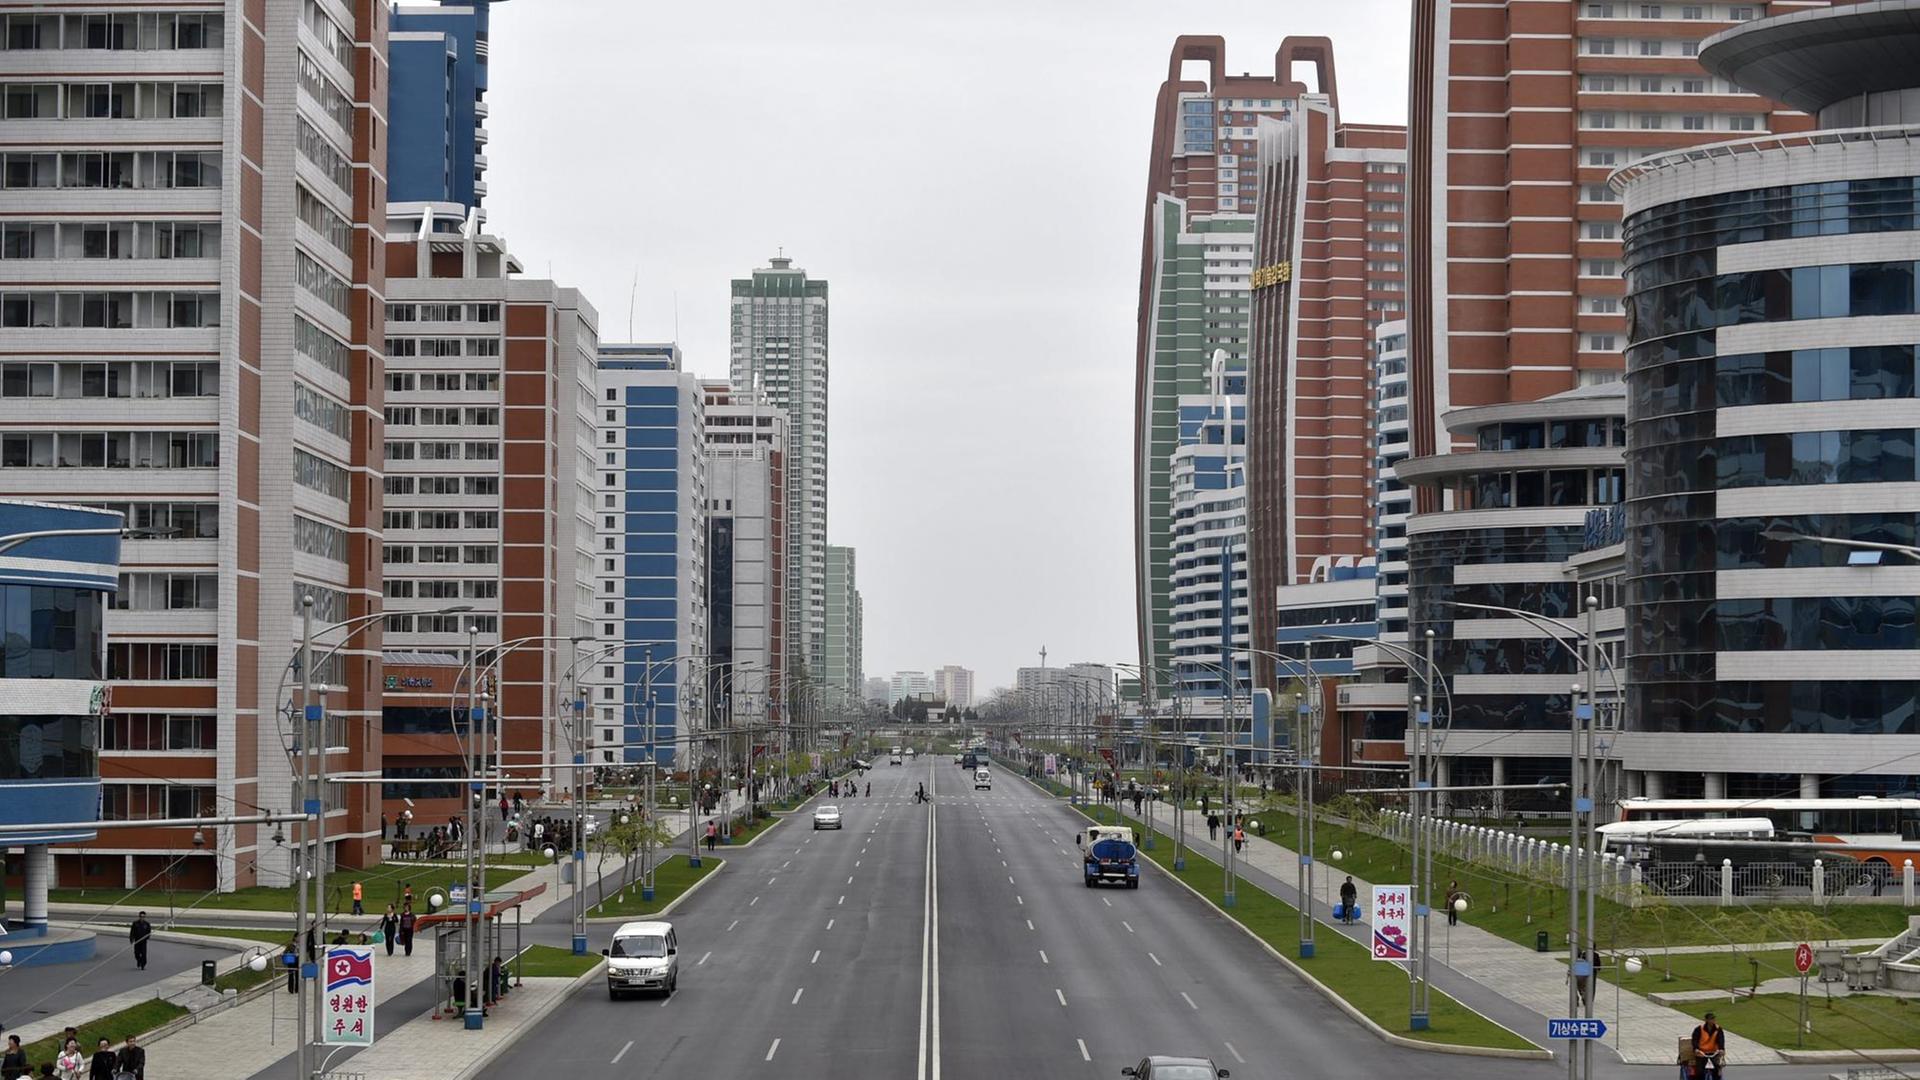 epa05601669 YEARENDER 2016 APRIL A view of the Mirae Scientists' Street in Pyongyang, North Korea, 16 April 2016. The Mirae Scientists' Street is a residential district for scientists, engineers and researchers which was inaugurated in November 2015. EPA/FRANCK ROBICHON |